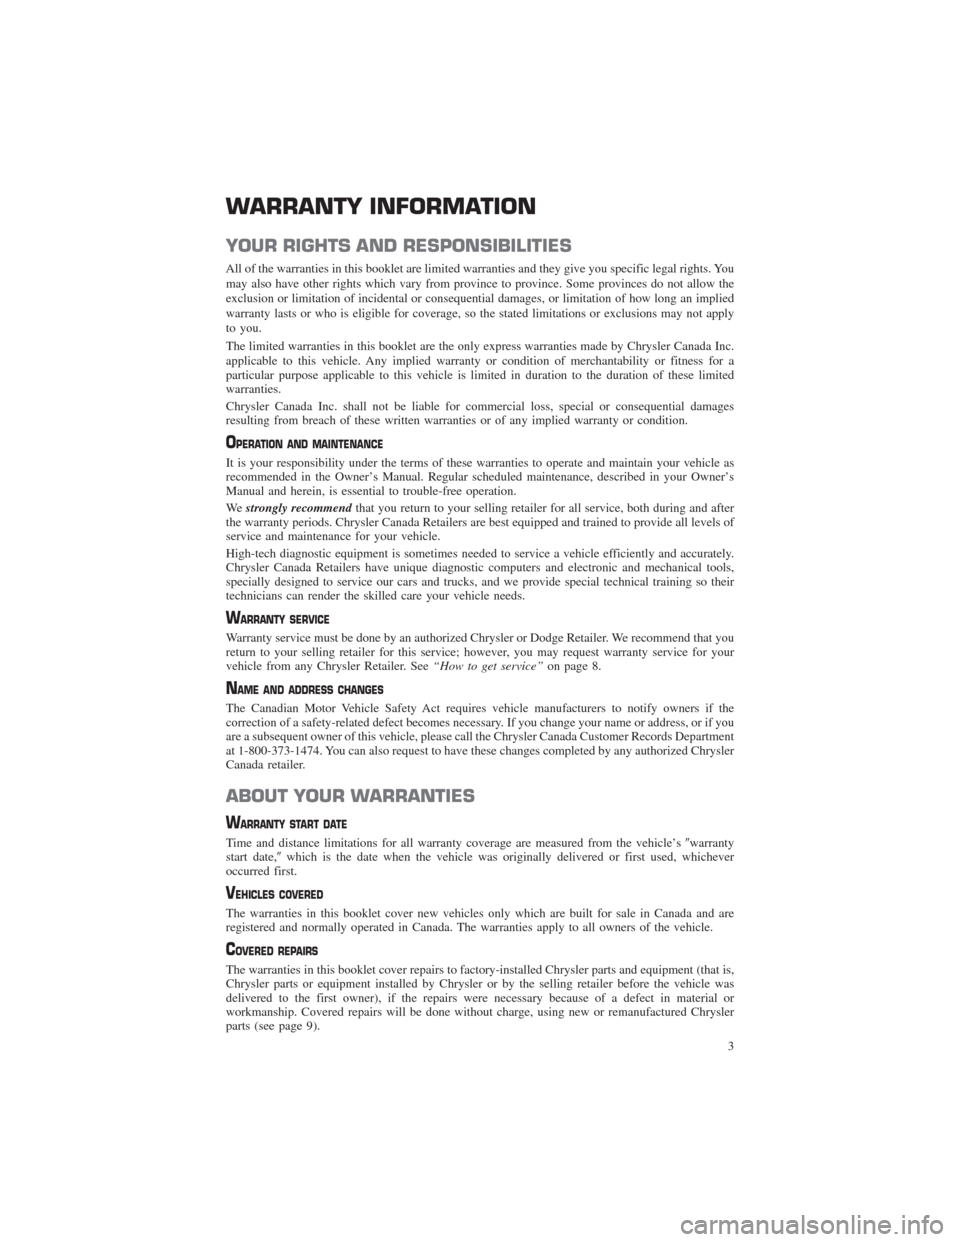 CHRYSLER 200 2014 1.G Warranty Booklet WARRANTY INFORMATION
YOUR RIGHTS AND RESPONSIBILITIES
All of the warranties in this booklet are limited warranties and they give you specific legal rights. You
may also have other rights which vary fr